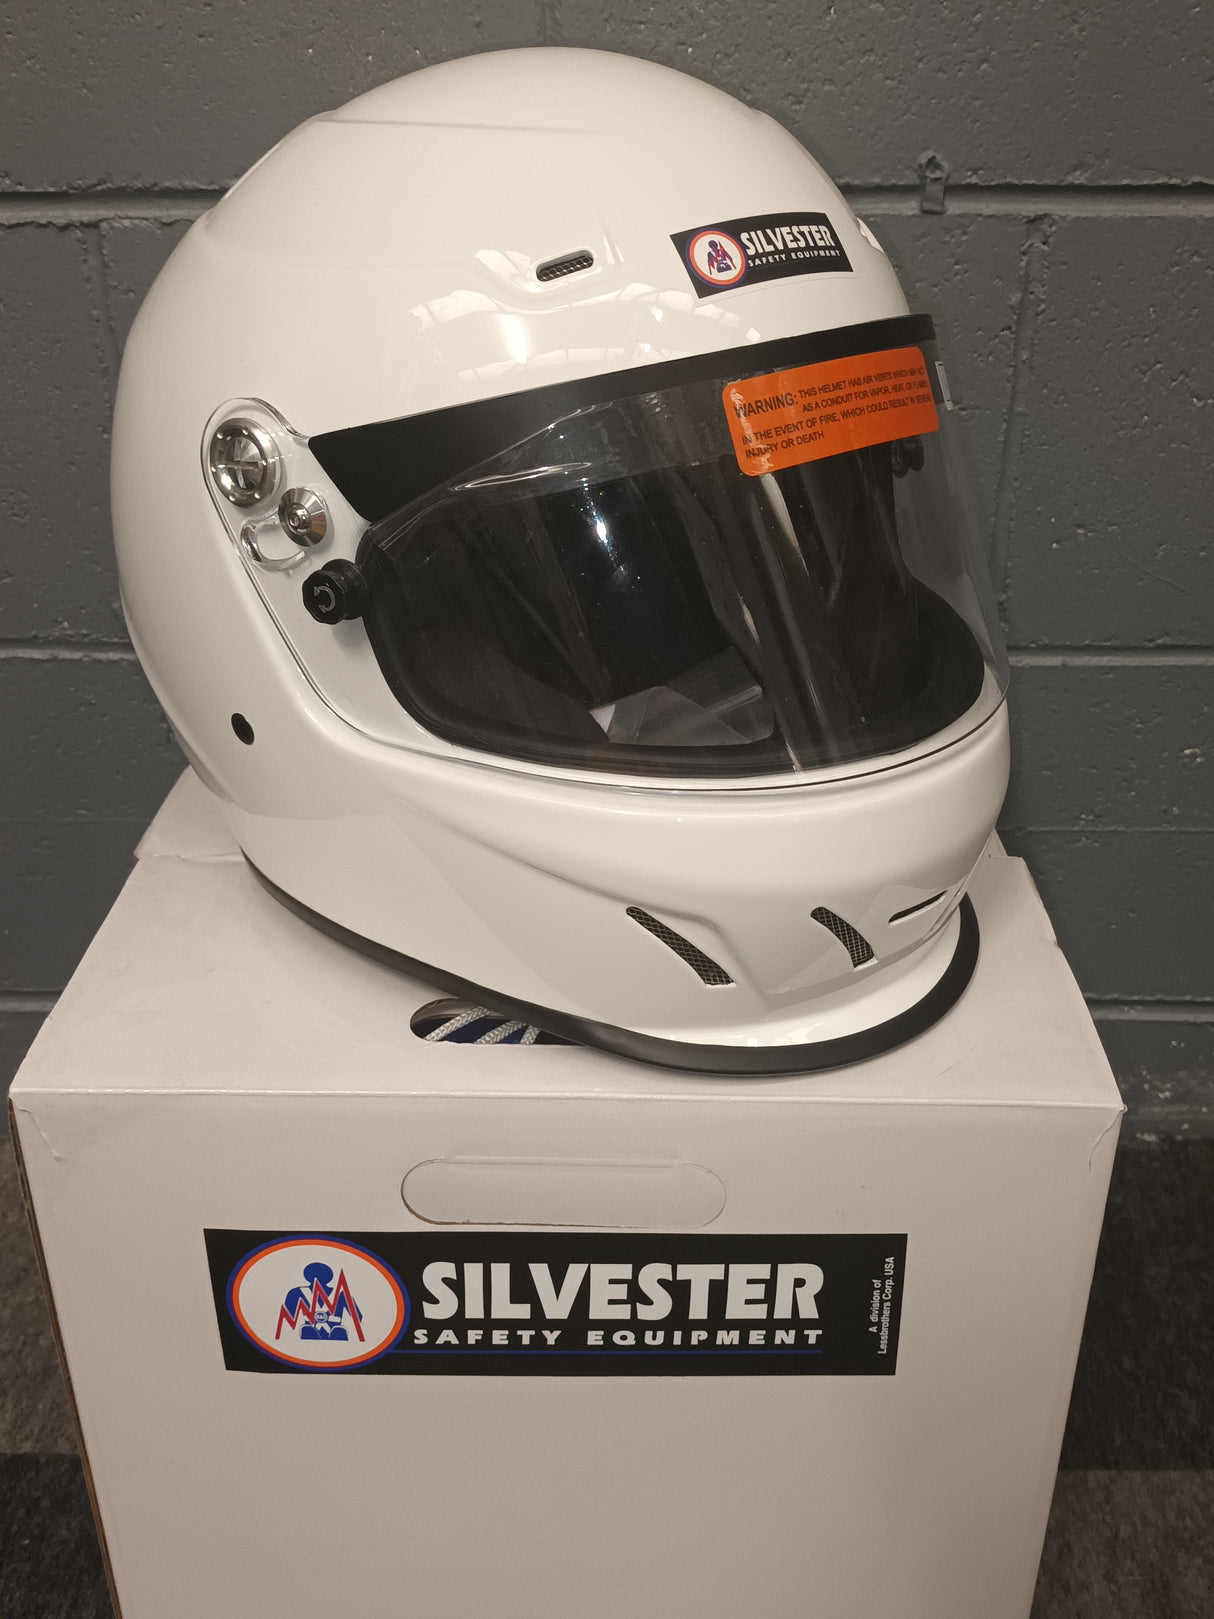 HELMET. FULL FACE RACE HELMET WITH AIR VENTS,DUCK BILL FRONT,TEAR OFF POSTS,HANS DRILLED